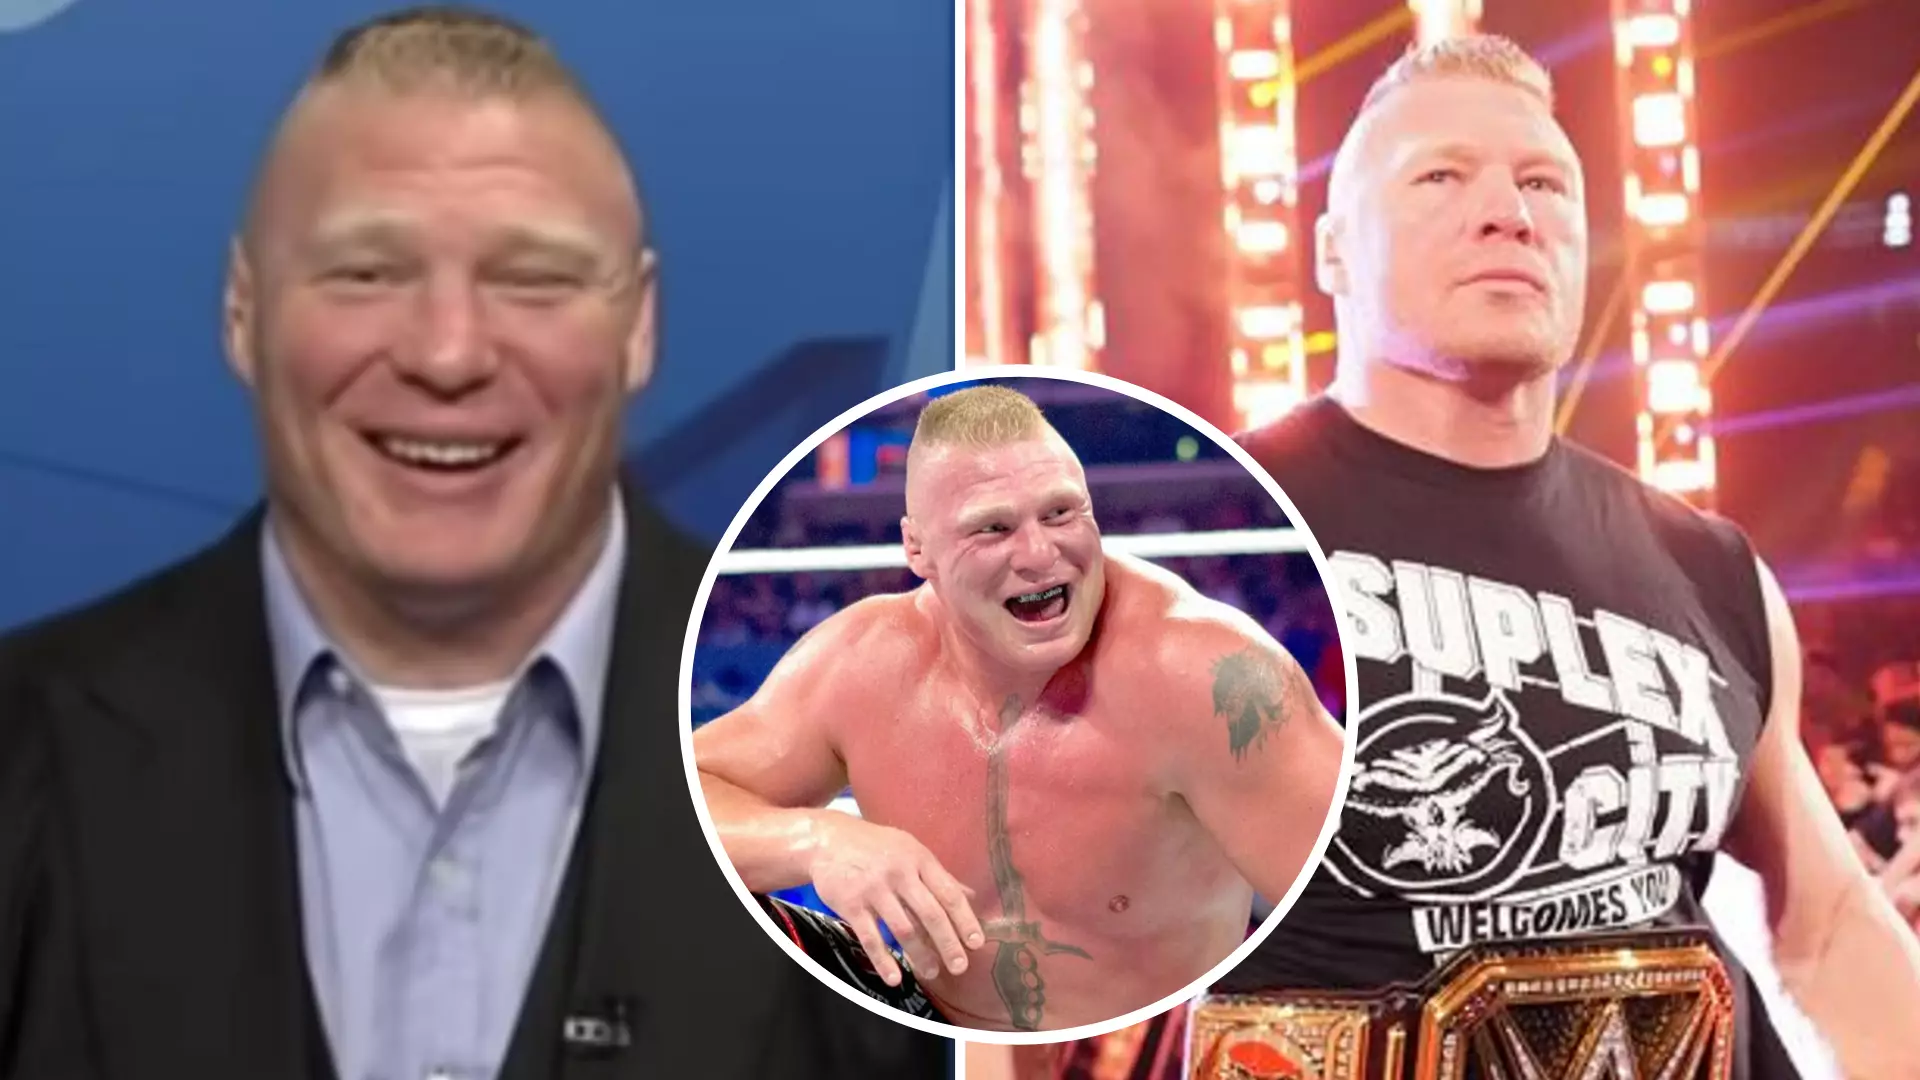 Brock Lesnar Once Got Into A Bar Fight And It Didn’t End Well For The Man Attacking Him